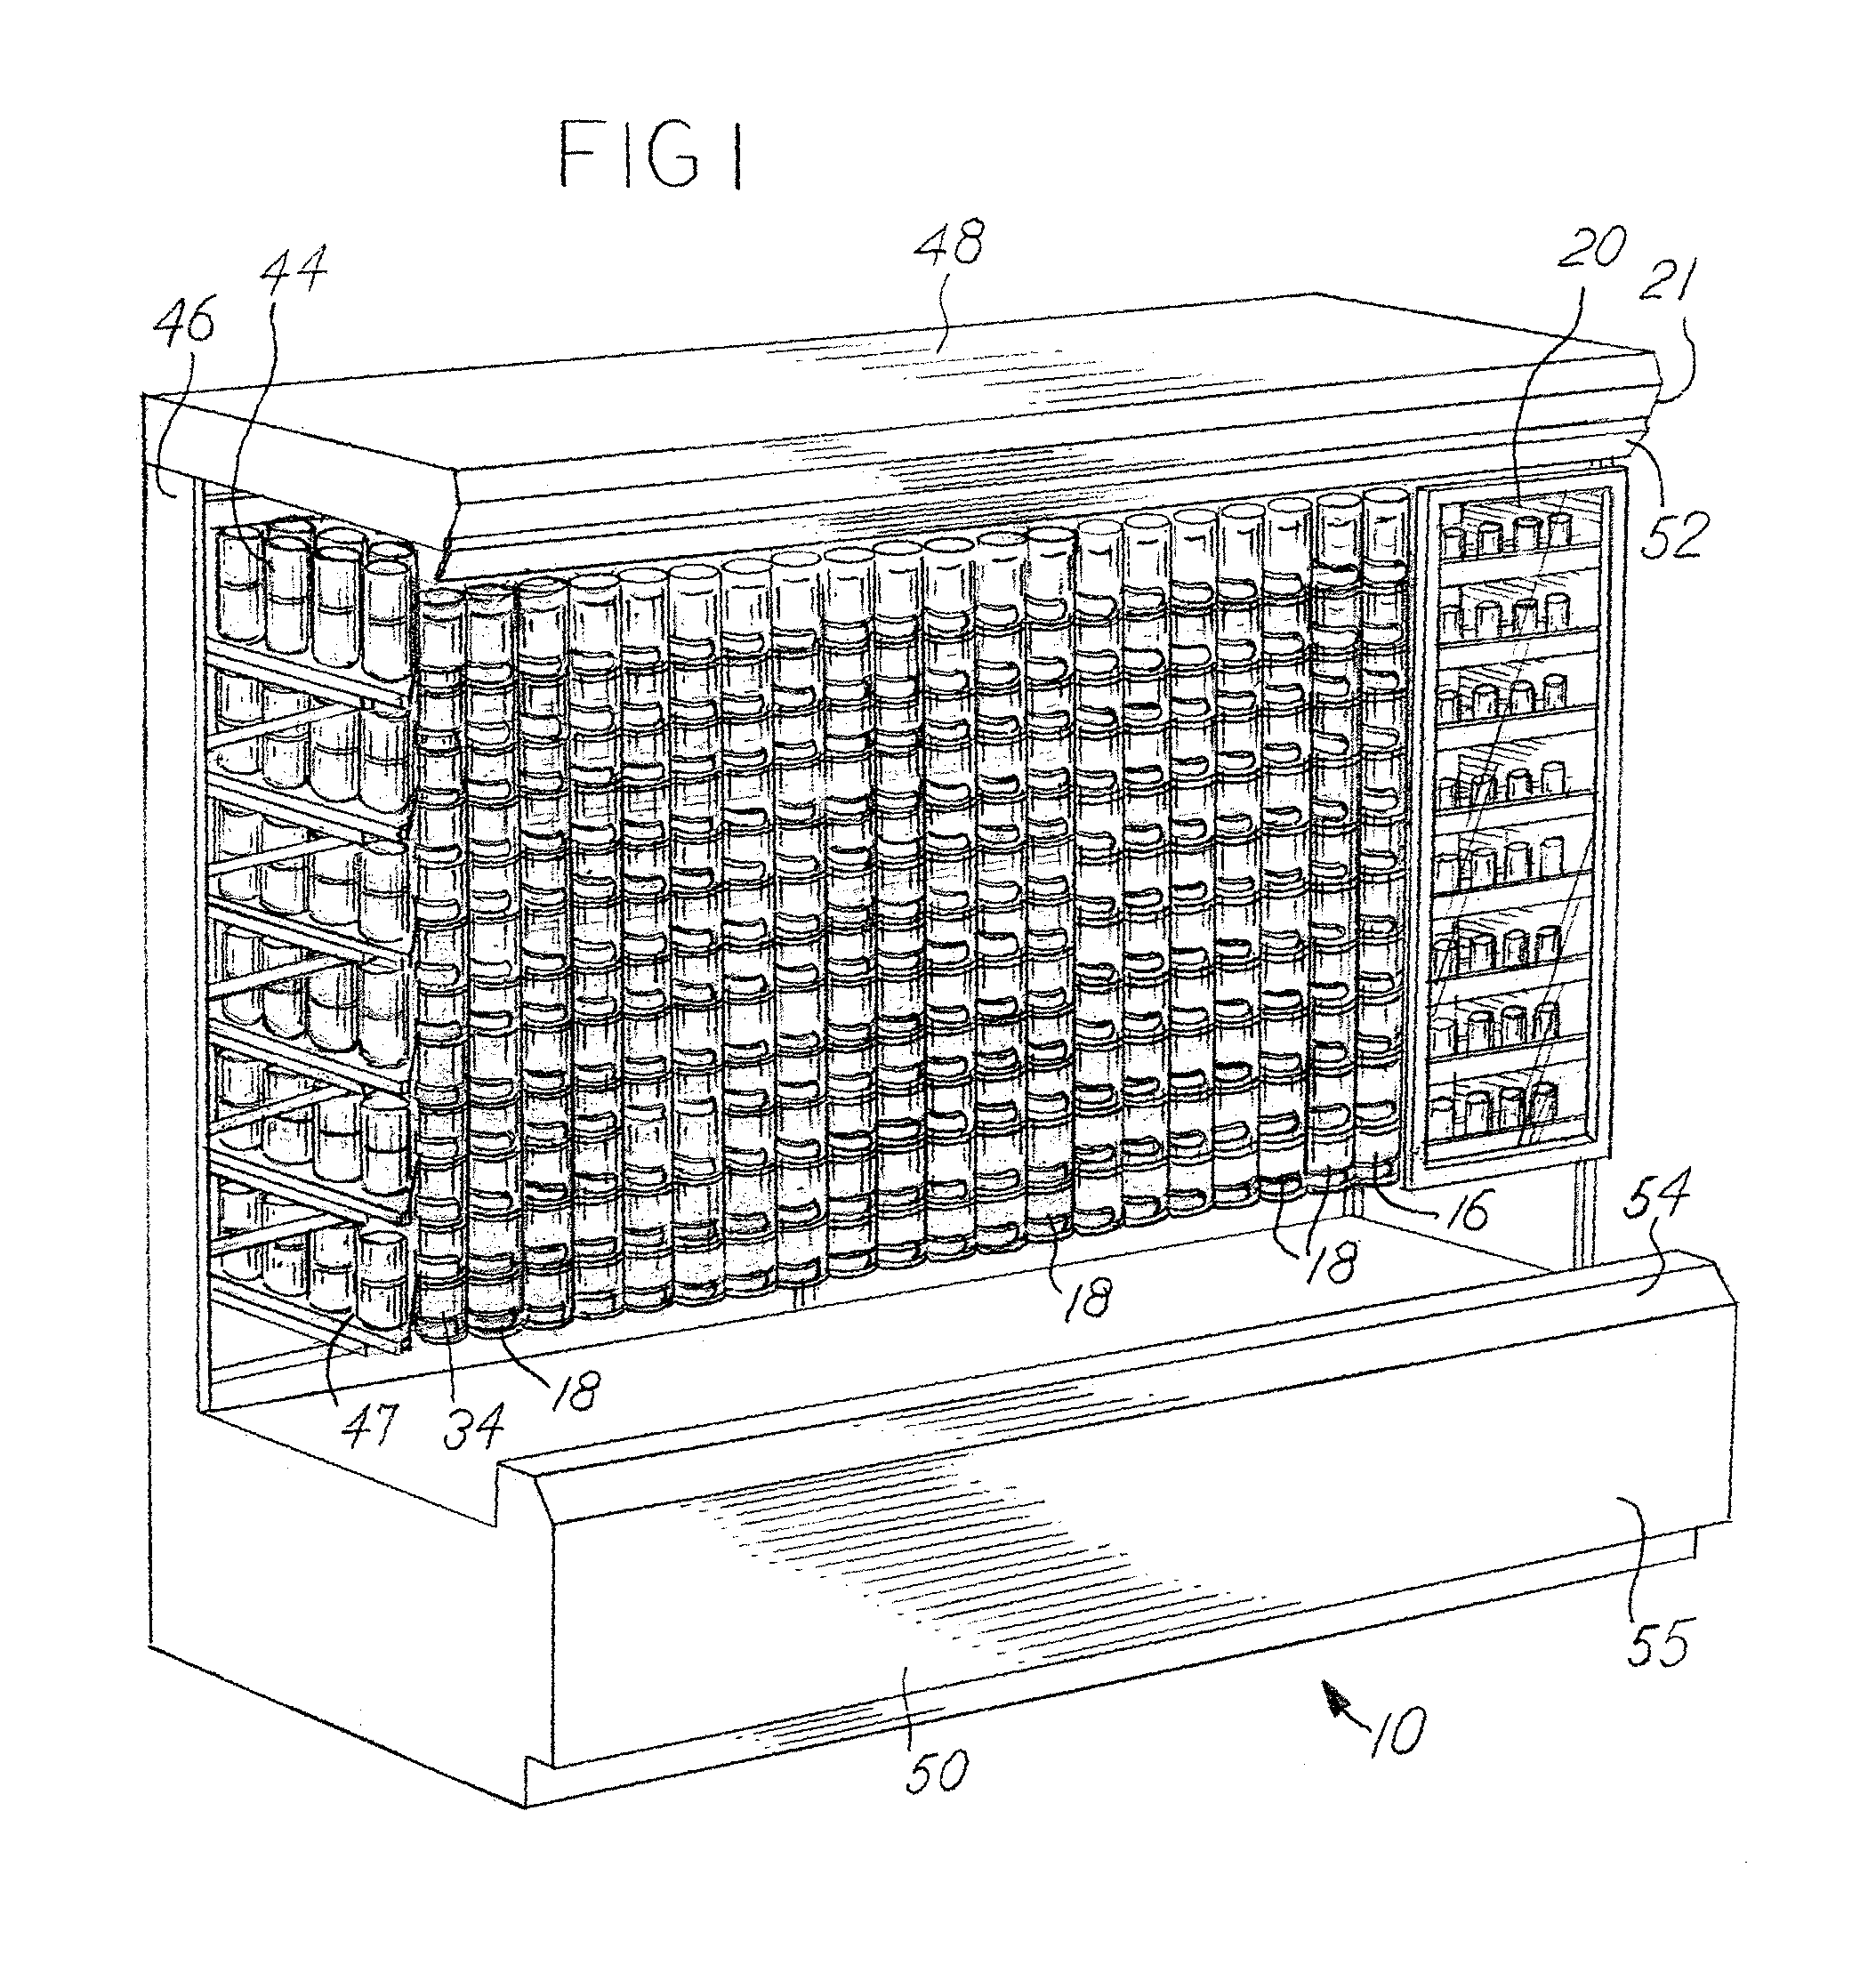 Merchandising system with flippable column and/or item stop